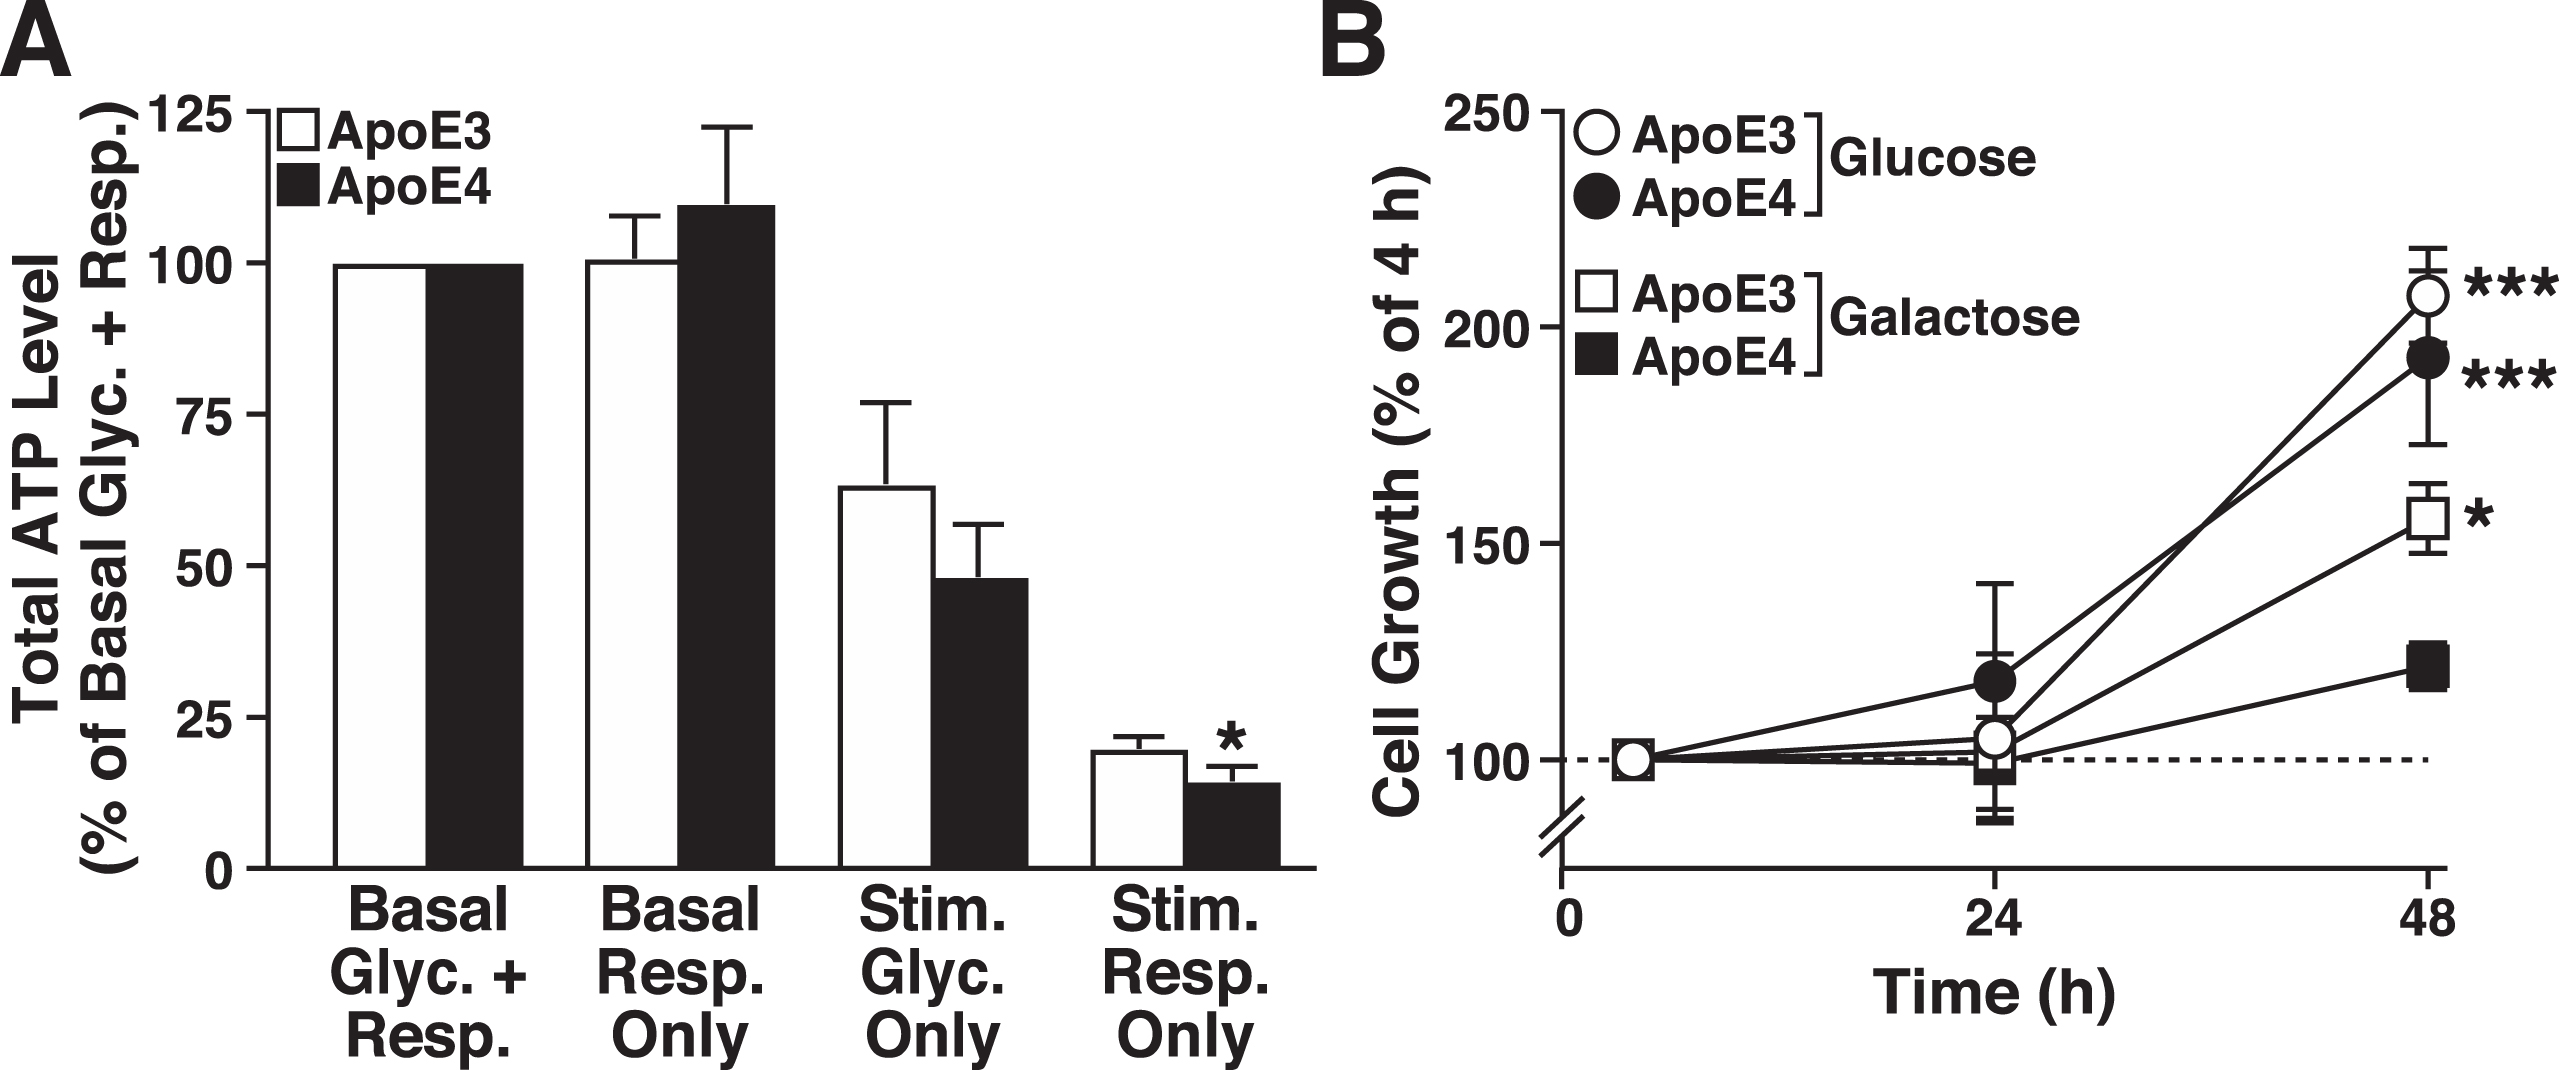 ApoE4 causes metabolic inflexibility in neuronal cells. A) Total ATP levels in N2a-apoE3 and N2a-apoE4 cells normalized to basal glycolysis and respiration (5 mM glucose and 5 mM pyruvate) (Basal Glyc. + Resp.). The other conditions are basal respiration only (5 mM galactose added in place of glucose) (Basal Resp. Only); stimulated glycolysis only (metabolism stimulated by depolarizing cellular membranes with 20μM FCCP and blocking ATP synthase with 10μM oligomycin) (Stim. Glyc. Only); and stimulated respiration only (energetic demand induced by both futile phosphorylation of 5 mM 2-deoxyglucose and Na+ cycling by 1μM monensin) (Stim. Resp. Only). Values are mean±SD (n = 4). *p < 0.05 versus N2a-apoE3 cells under same condition (t test). B) Growth of N2a-apoE3 and N2a-apoE4 cells in medium containing 5 mM pyruvate and either 5 mM glucose (to support glycolysis and respiration) or 5 mM galactose (to support respiration only). Values are mean±SD (n = 3). *p < 0.05, ***p < 0.001 versus N2a-apoE4 + galactose cells at the 48-h time point (one-way ANOVA with Holm-Sidak post test).